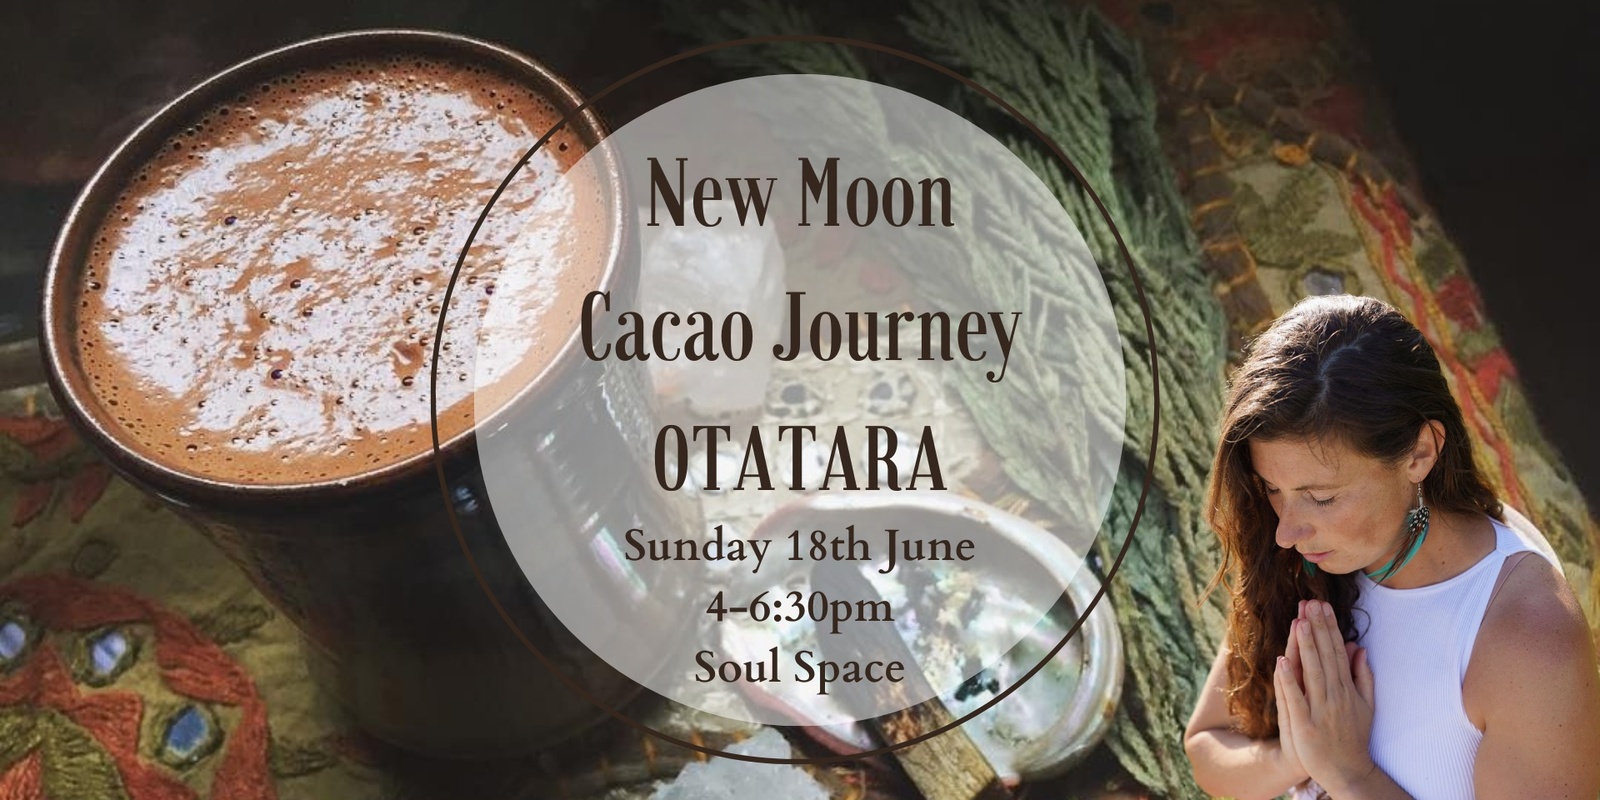 New Moon Cacao Journey